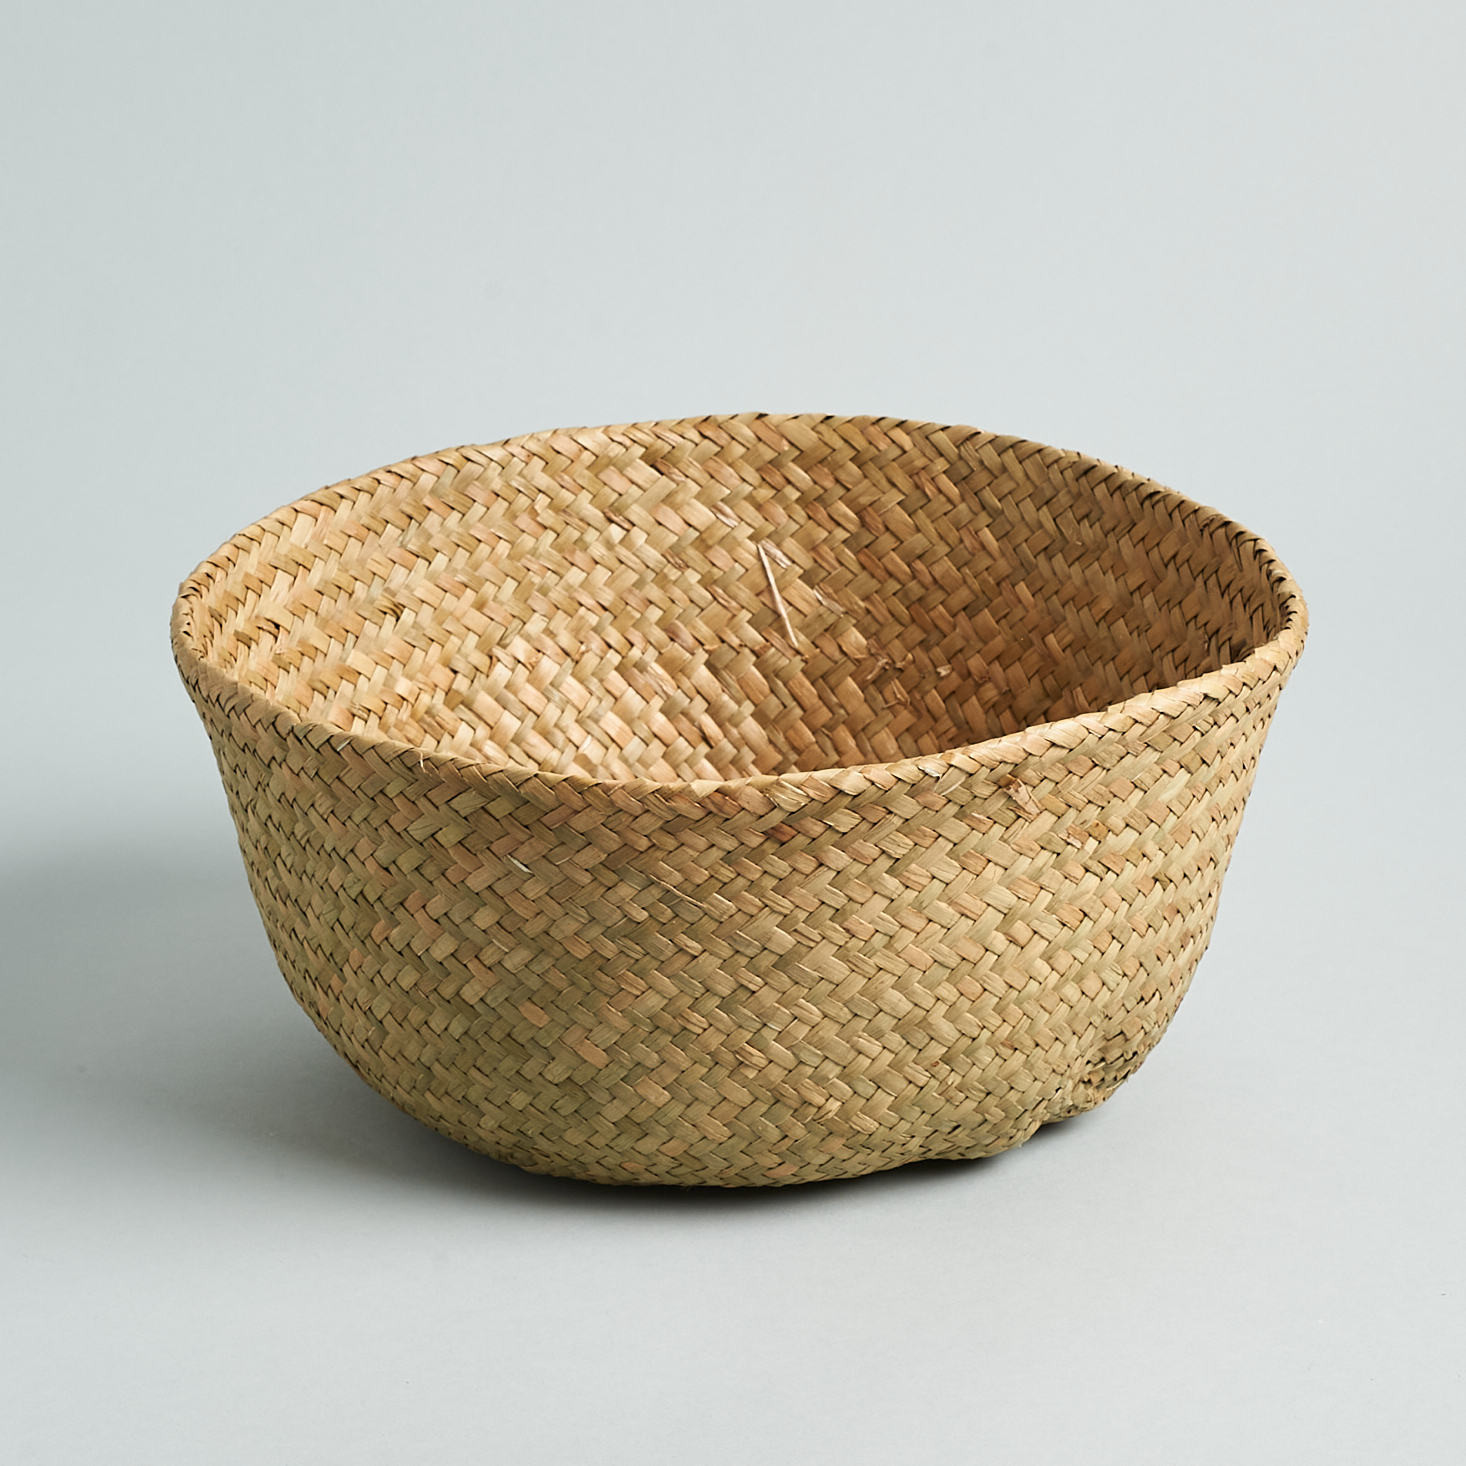 seagrass belly basket from JourneeBox Spring 2021